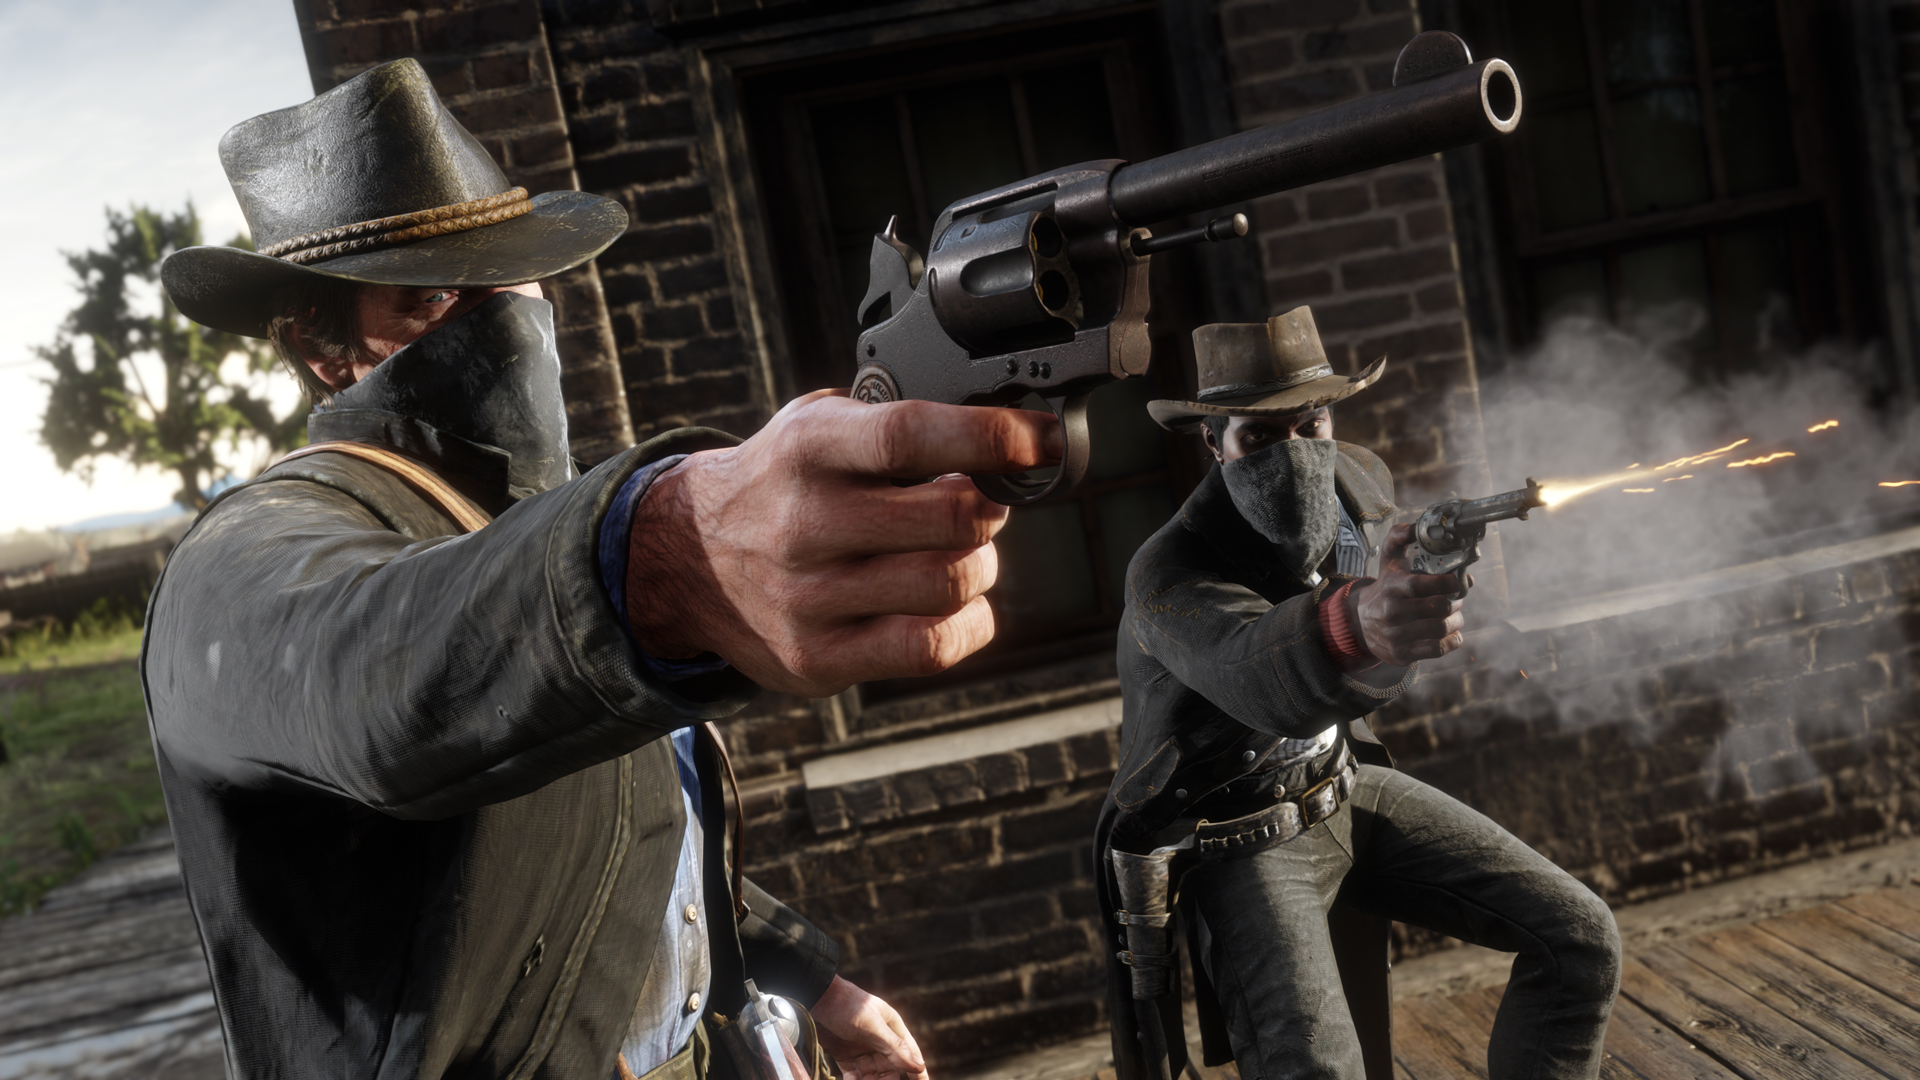 Red Dead Redemption 2 (PC): Ultra Settings (4K 60FPS) on an RTX